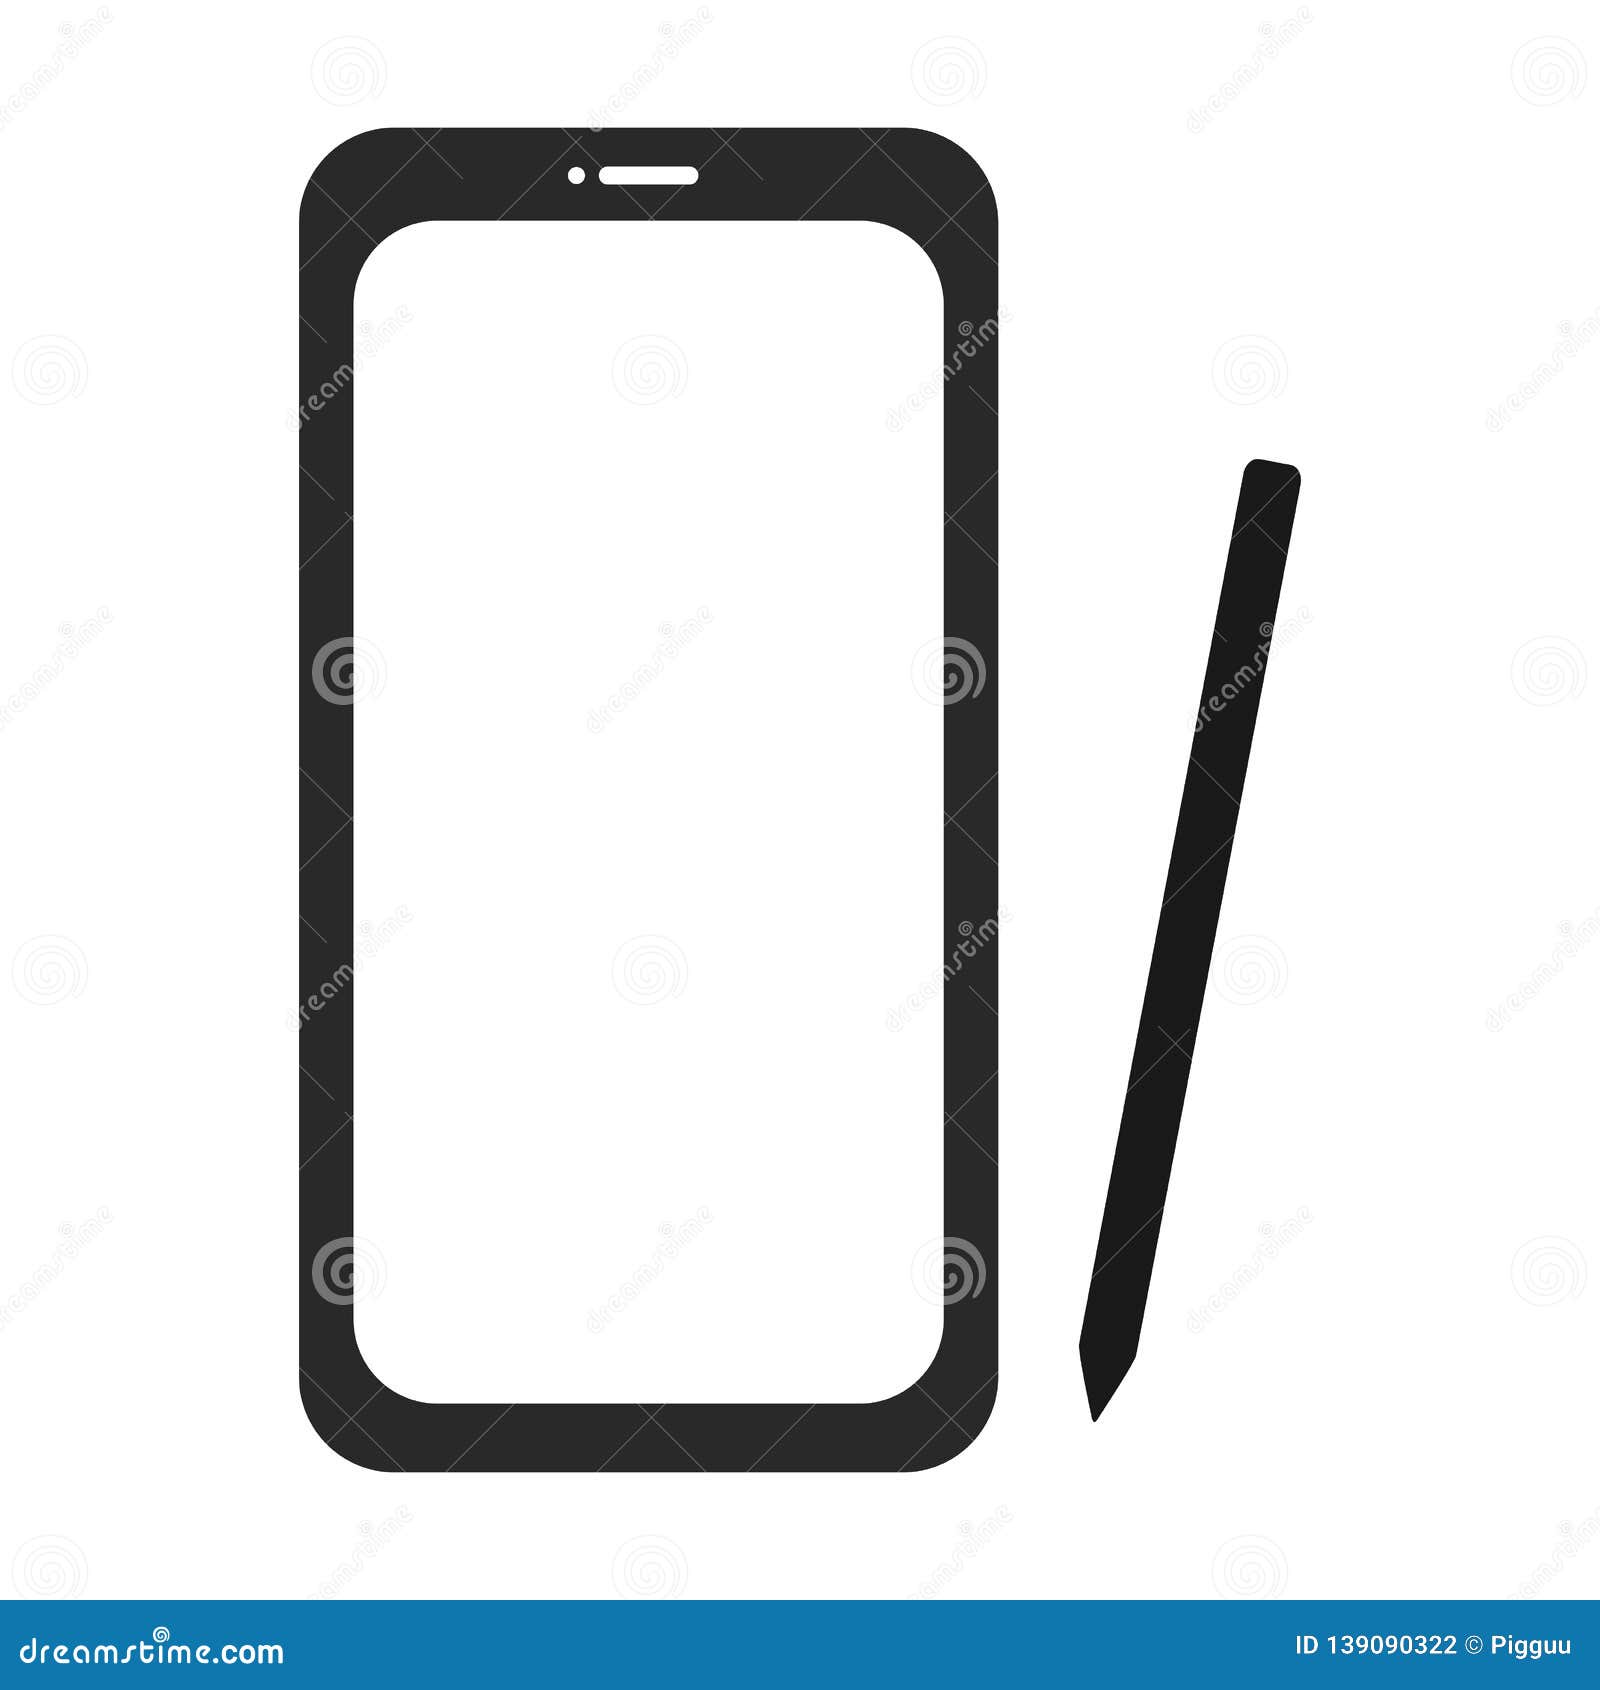 Blank Screen Black Smartphone with Stylus Isolated on White Stock Vector - Illustration of digital, display: 139090322